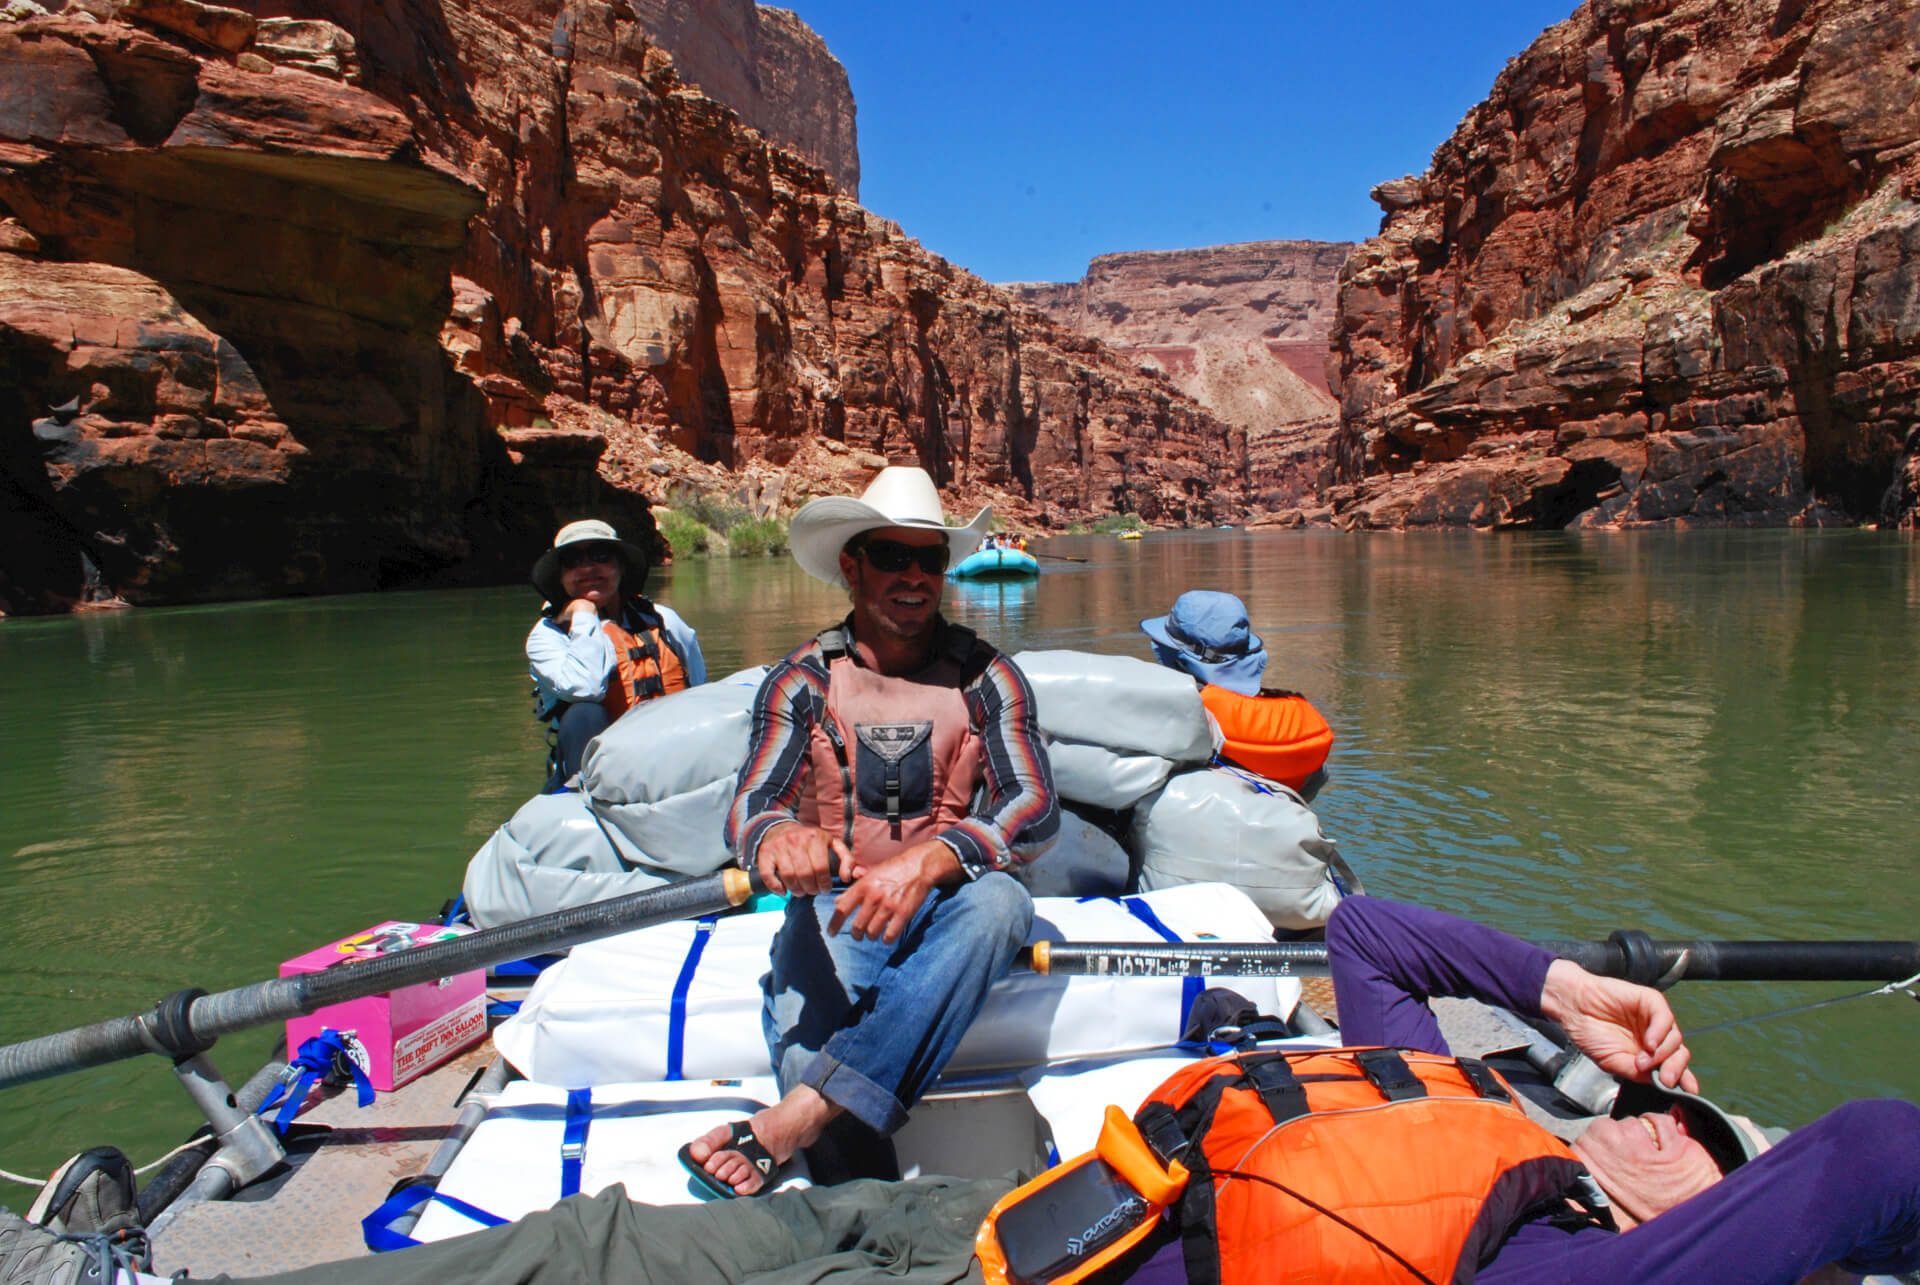 Grand Canyon Whitewater guide John Dunn loves getting to know the wide array of folks who visit the Canyon.